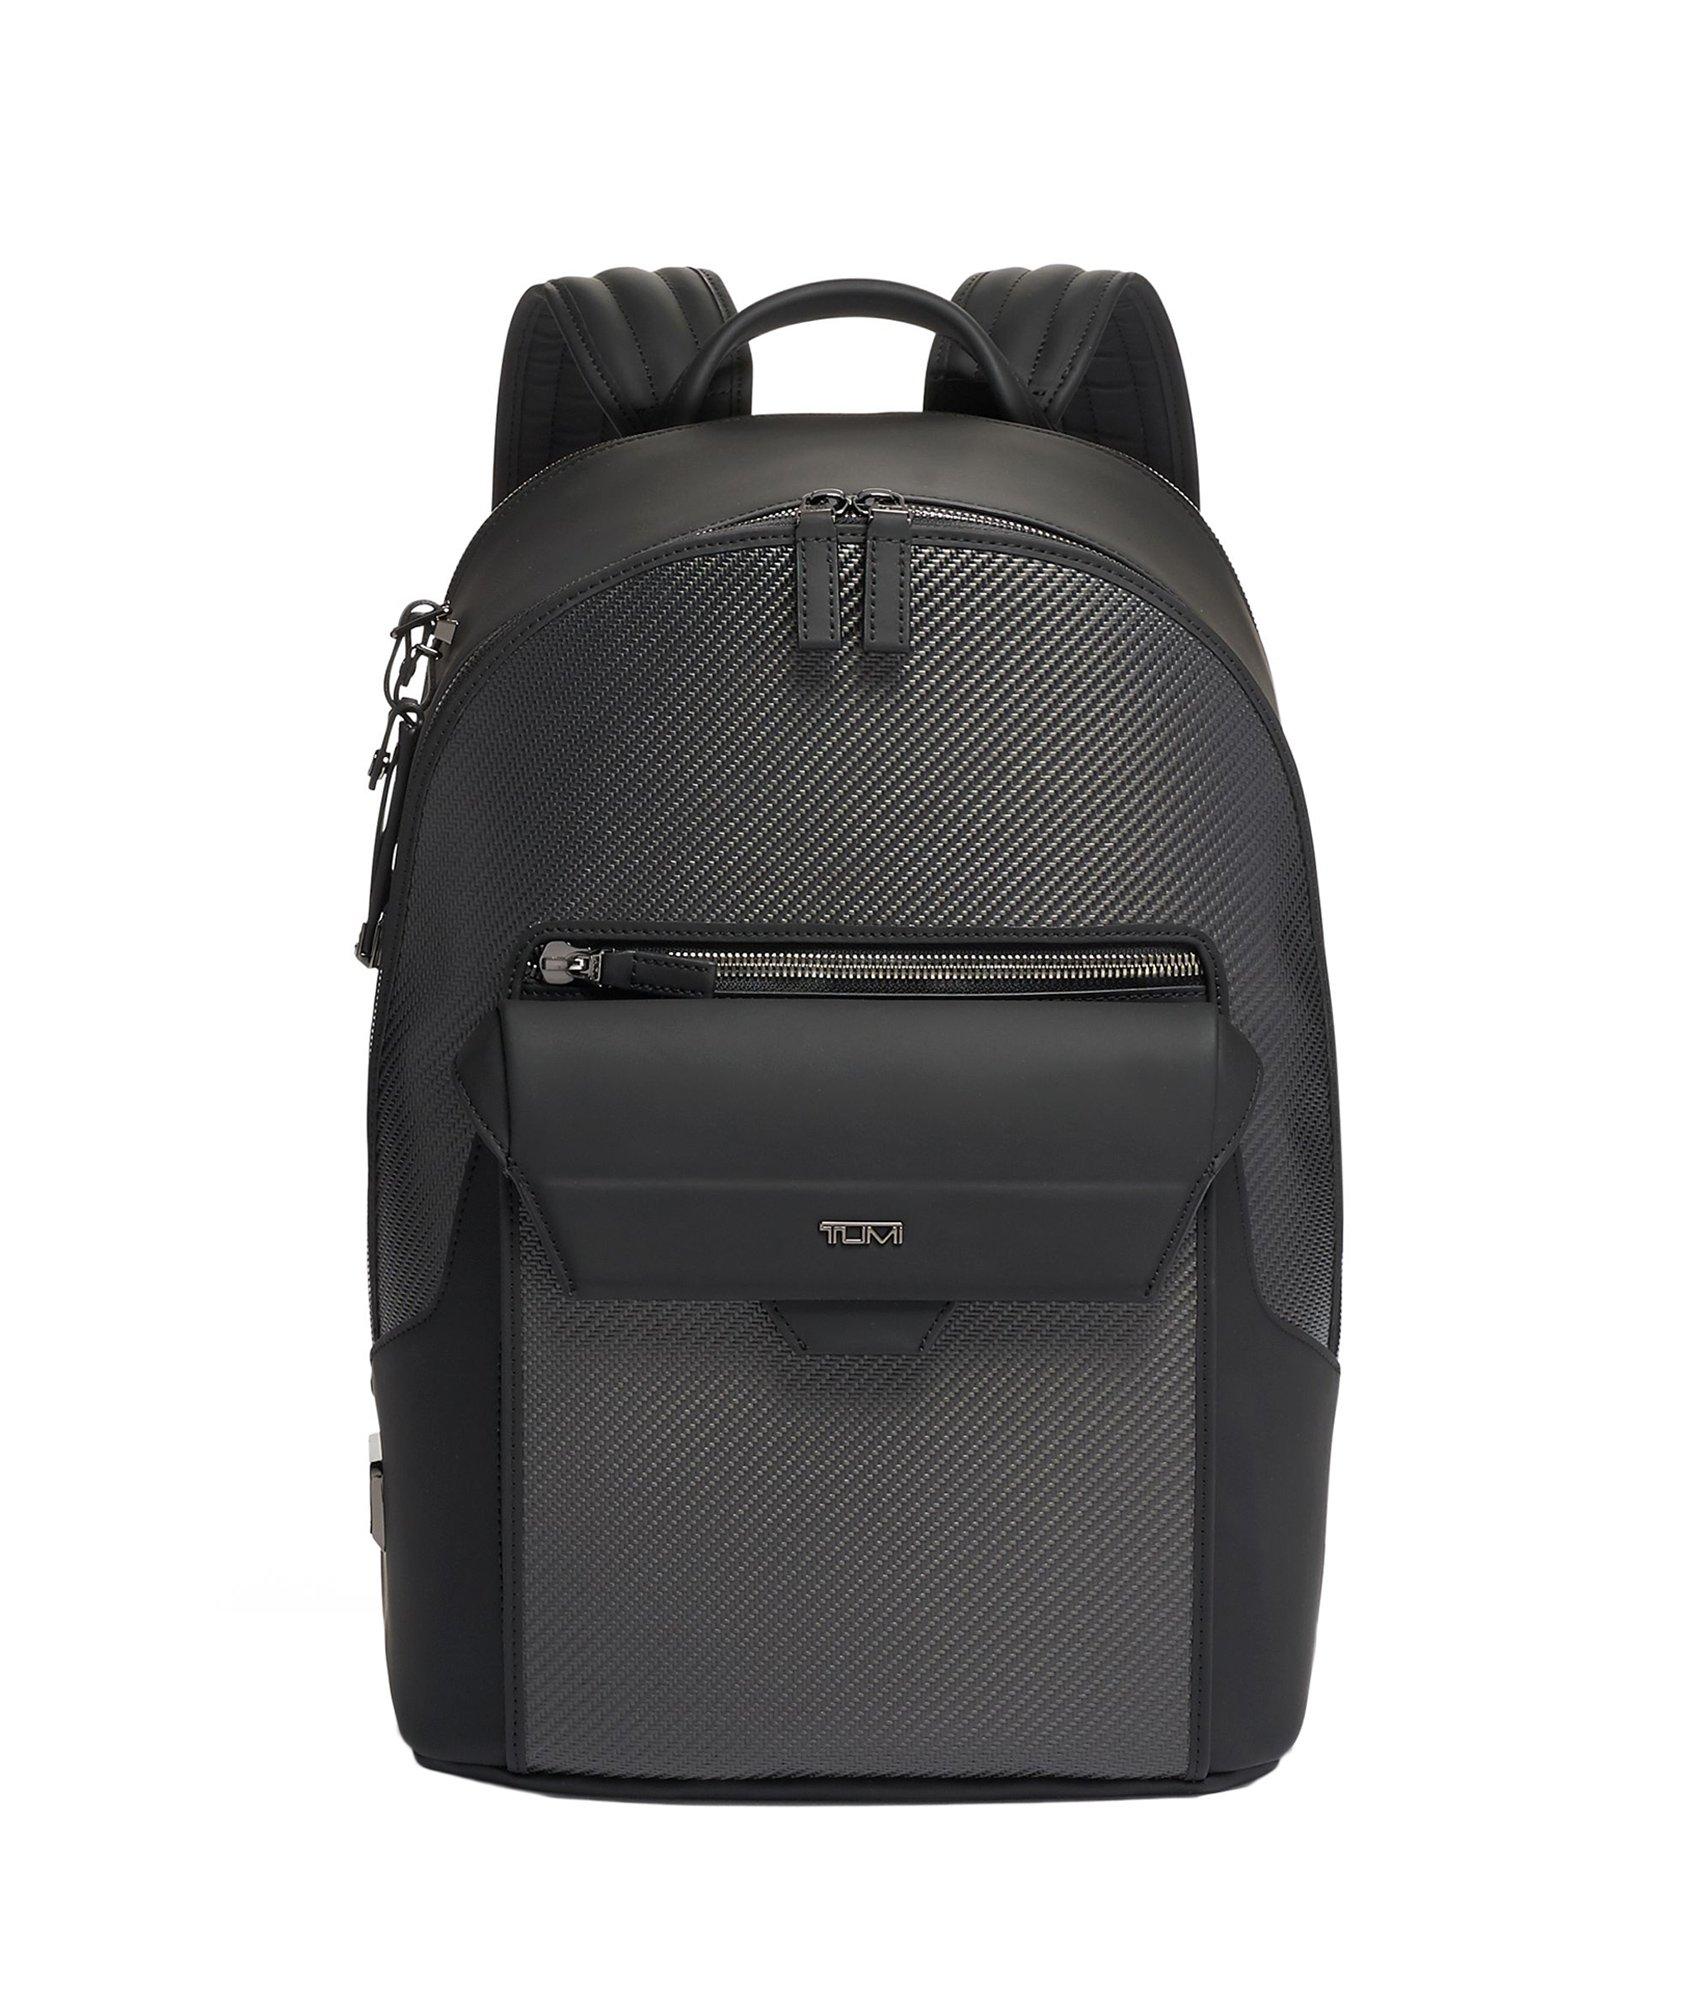 Marlow Backpack image 0